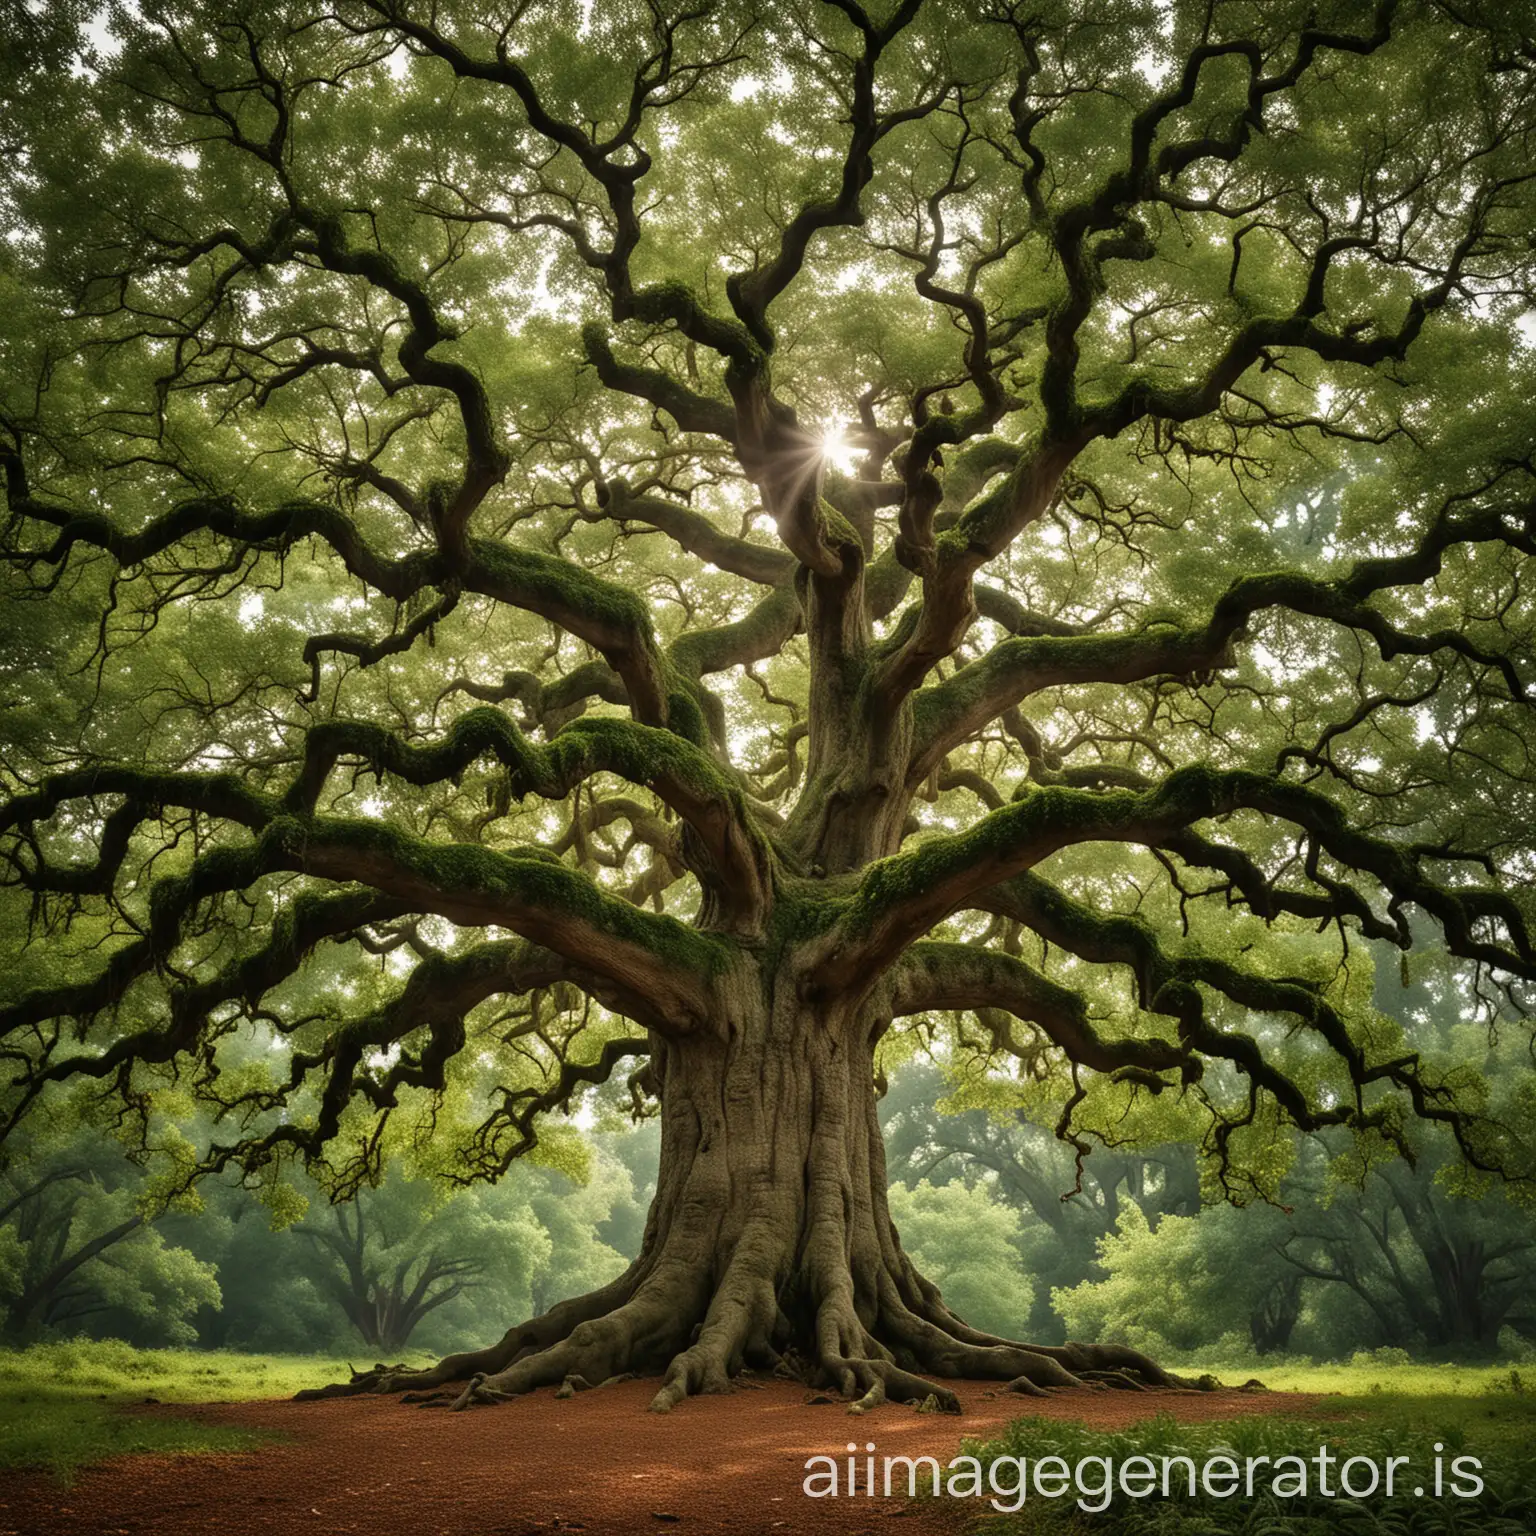 In a lush green forest filled with vibrant flora and bustling wildlife, there stood an ancient and majestic oak tree named Oliver. Known for his towering presence and extensive branches that seemed to touch the sky, Oliver was revered throughout the forest for his wisdom and kindness. His deep roots anchored him firmly in the earth, symbolizing his vast knowledge and strength.